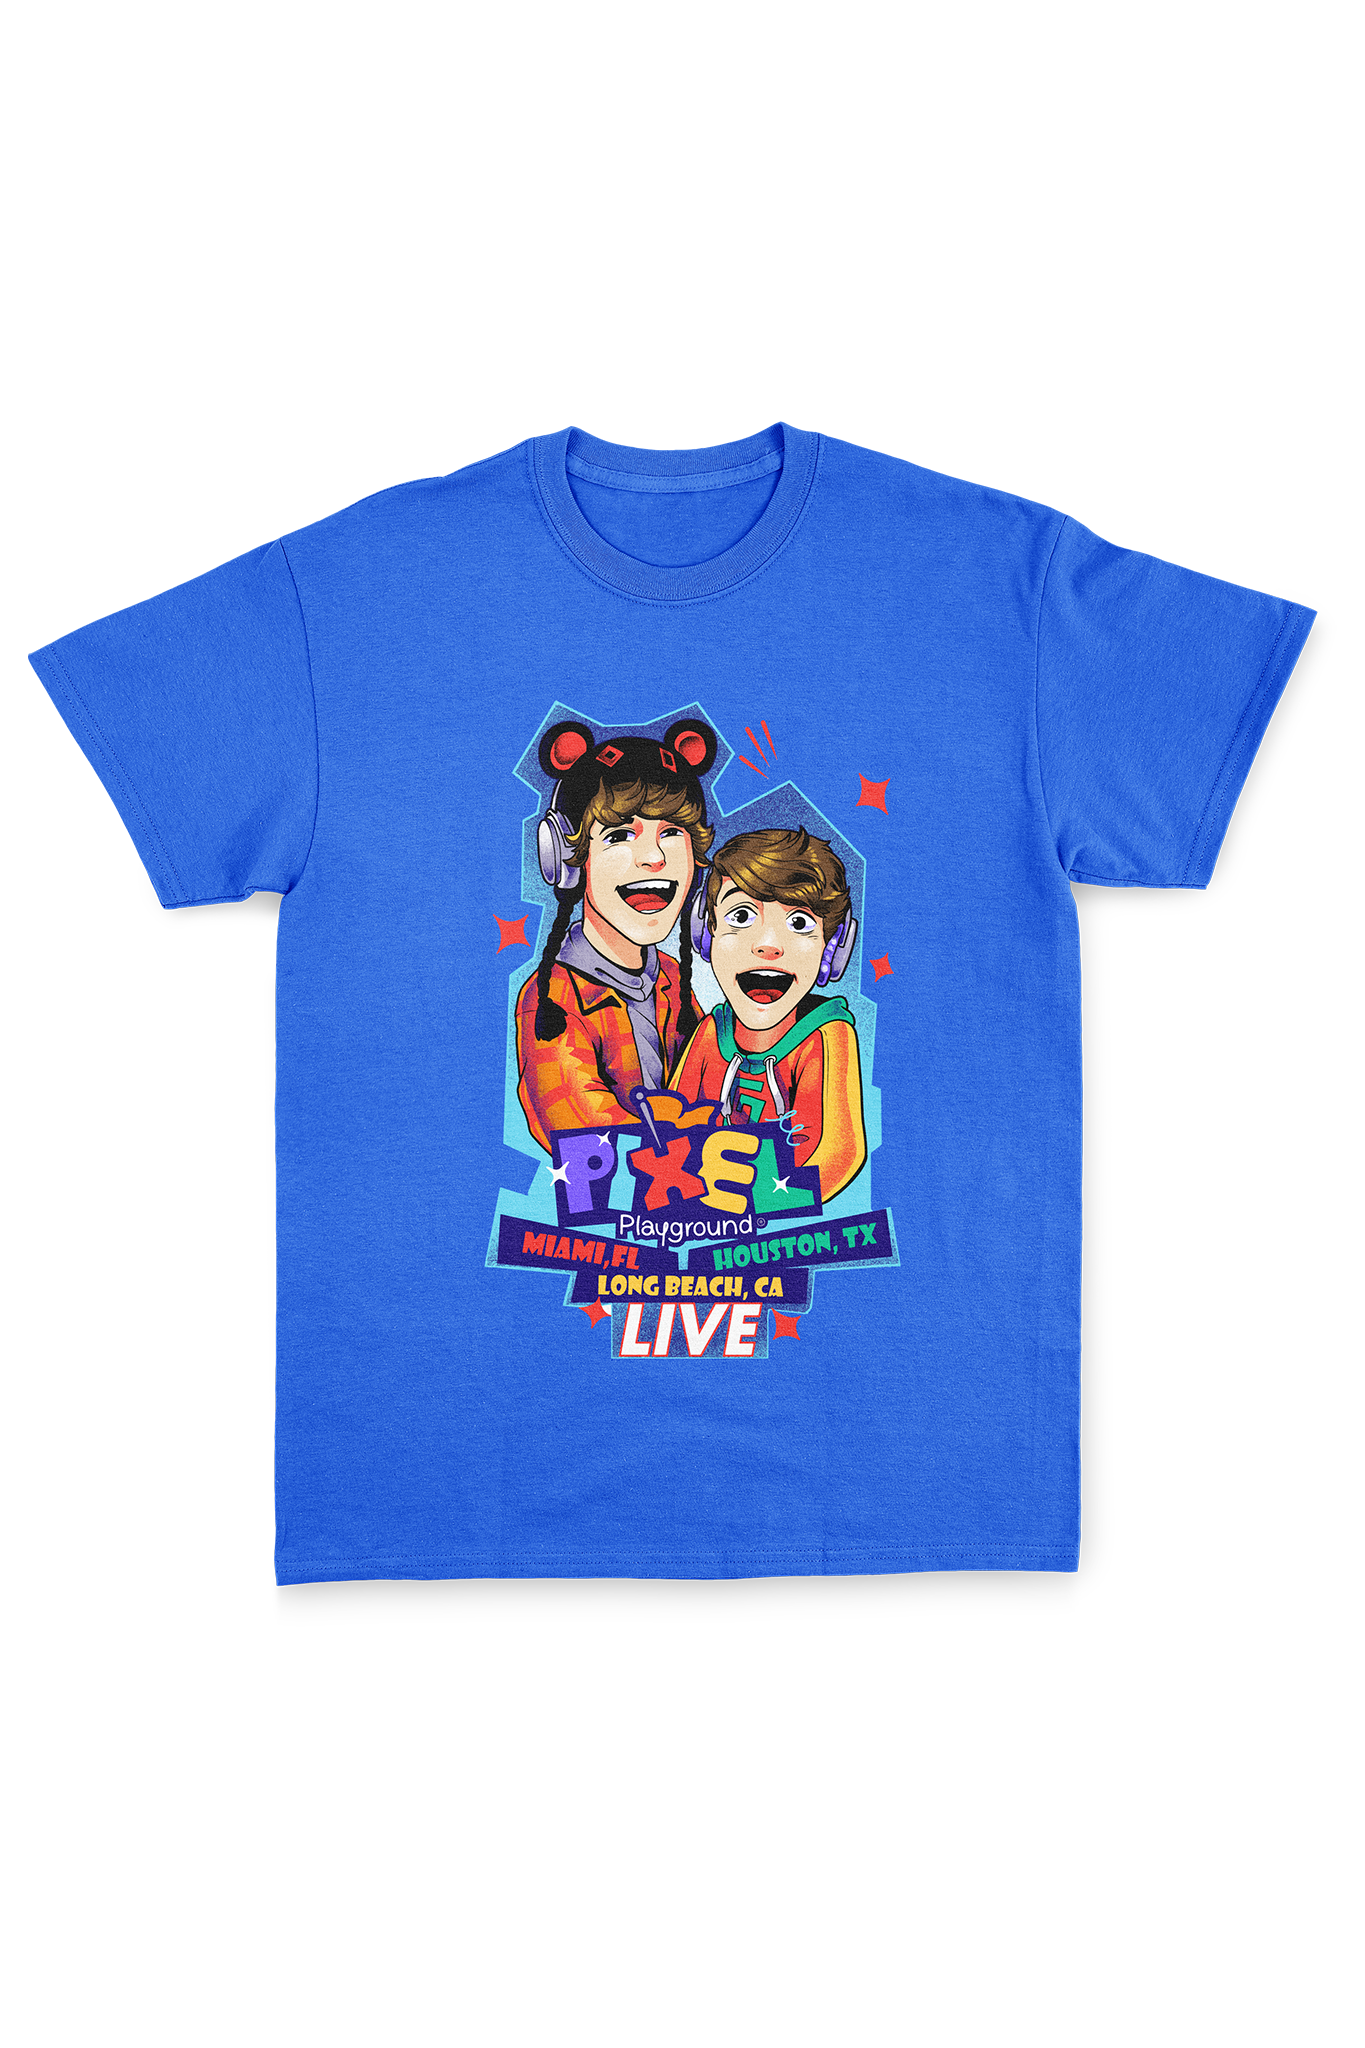 Royal blue t-shirt with the Pixel Playground print across the entire front.